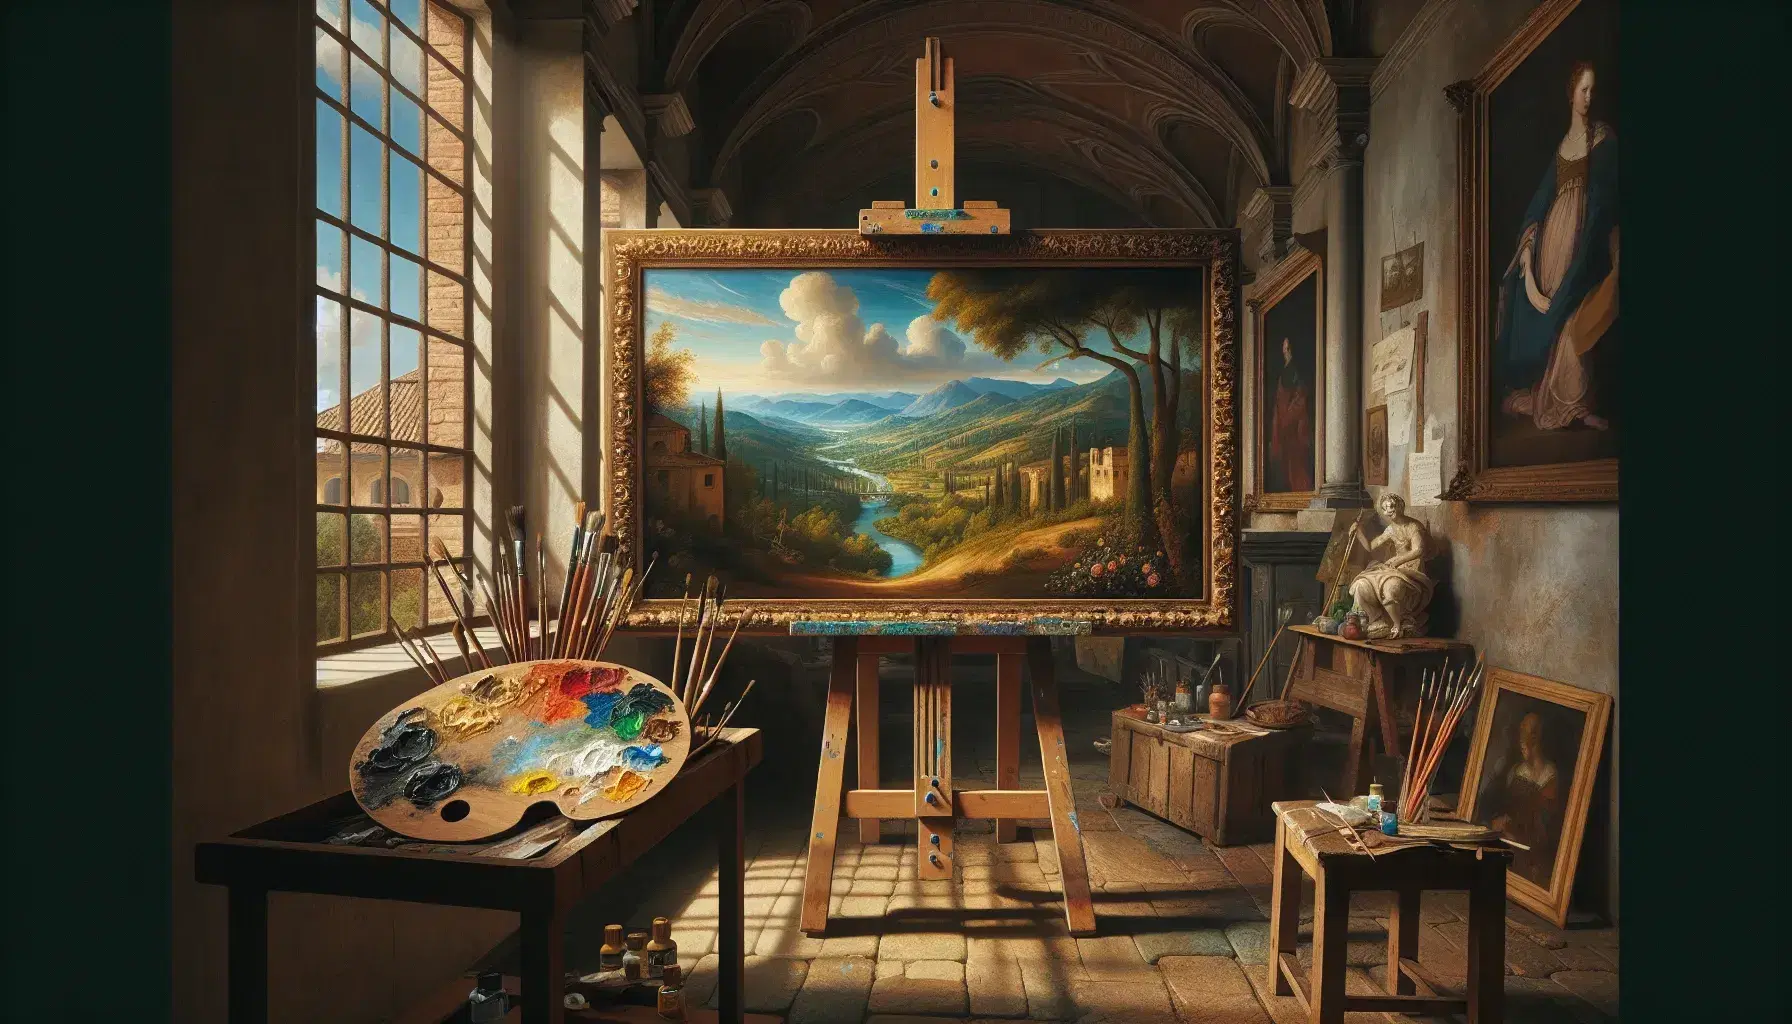 Renaissance artist's workshop with an unfinished landscape painting on an easel, a palette with oil paints, and scientific instruments on an oak table.